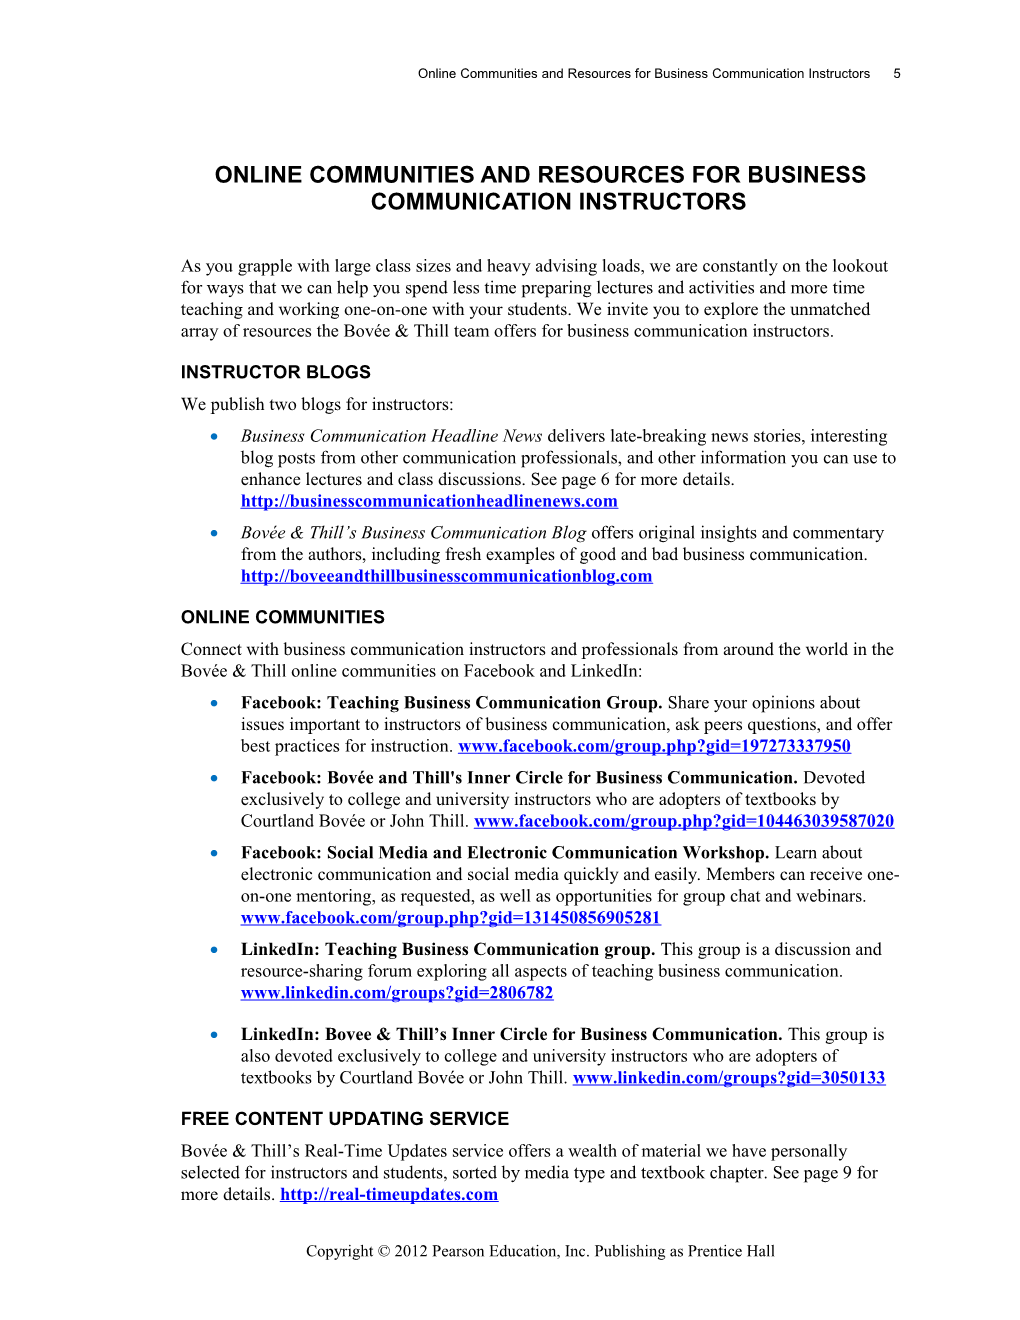 Online Communities and Resources for Business Communication Instructors